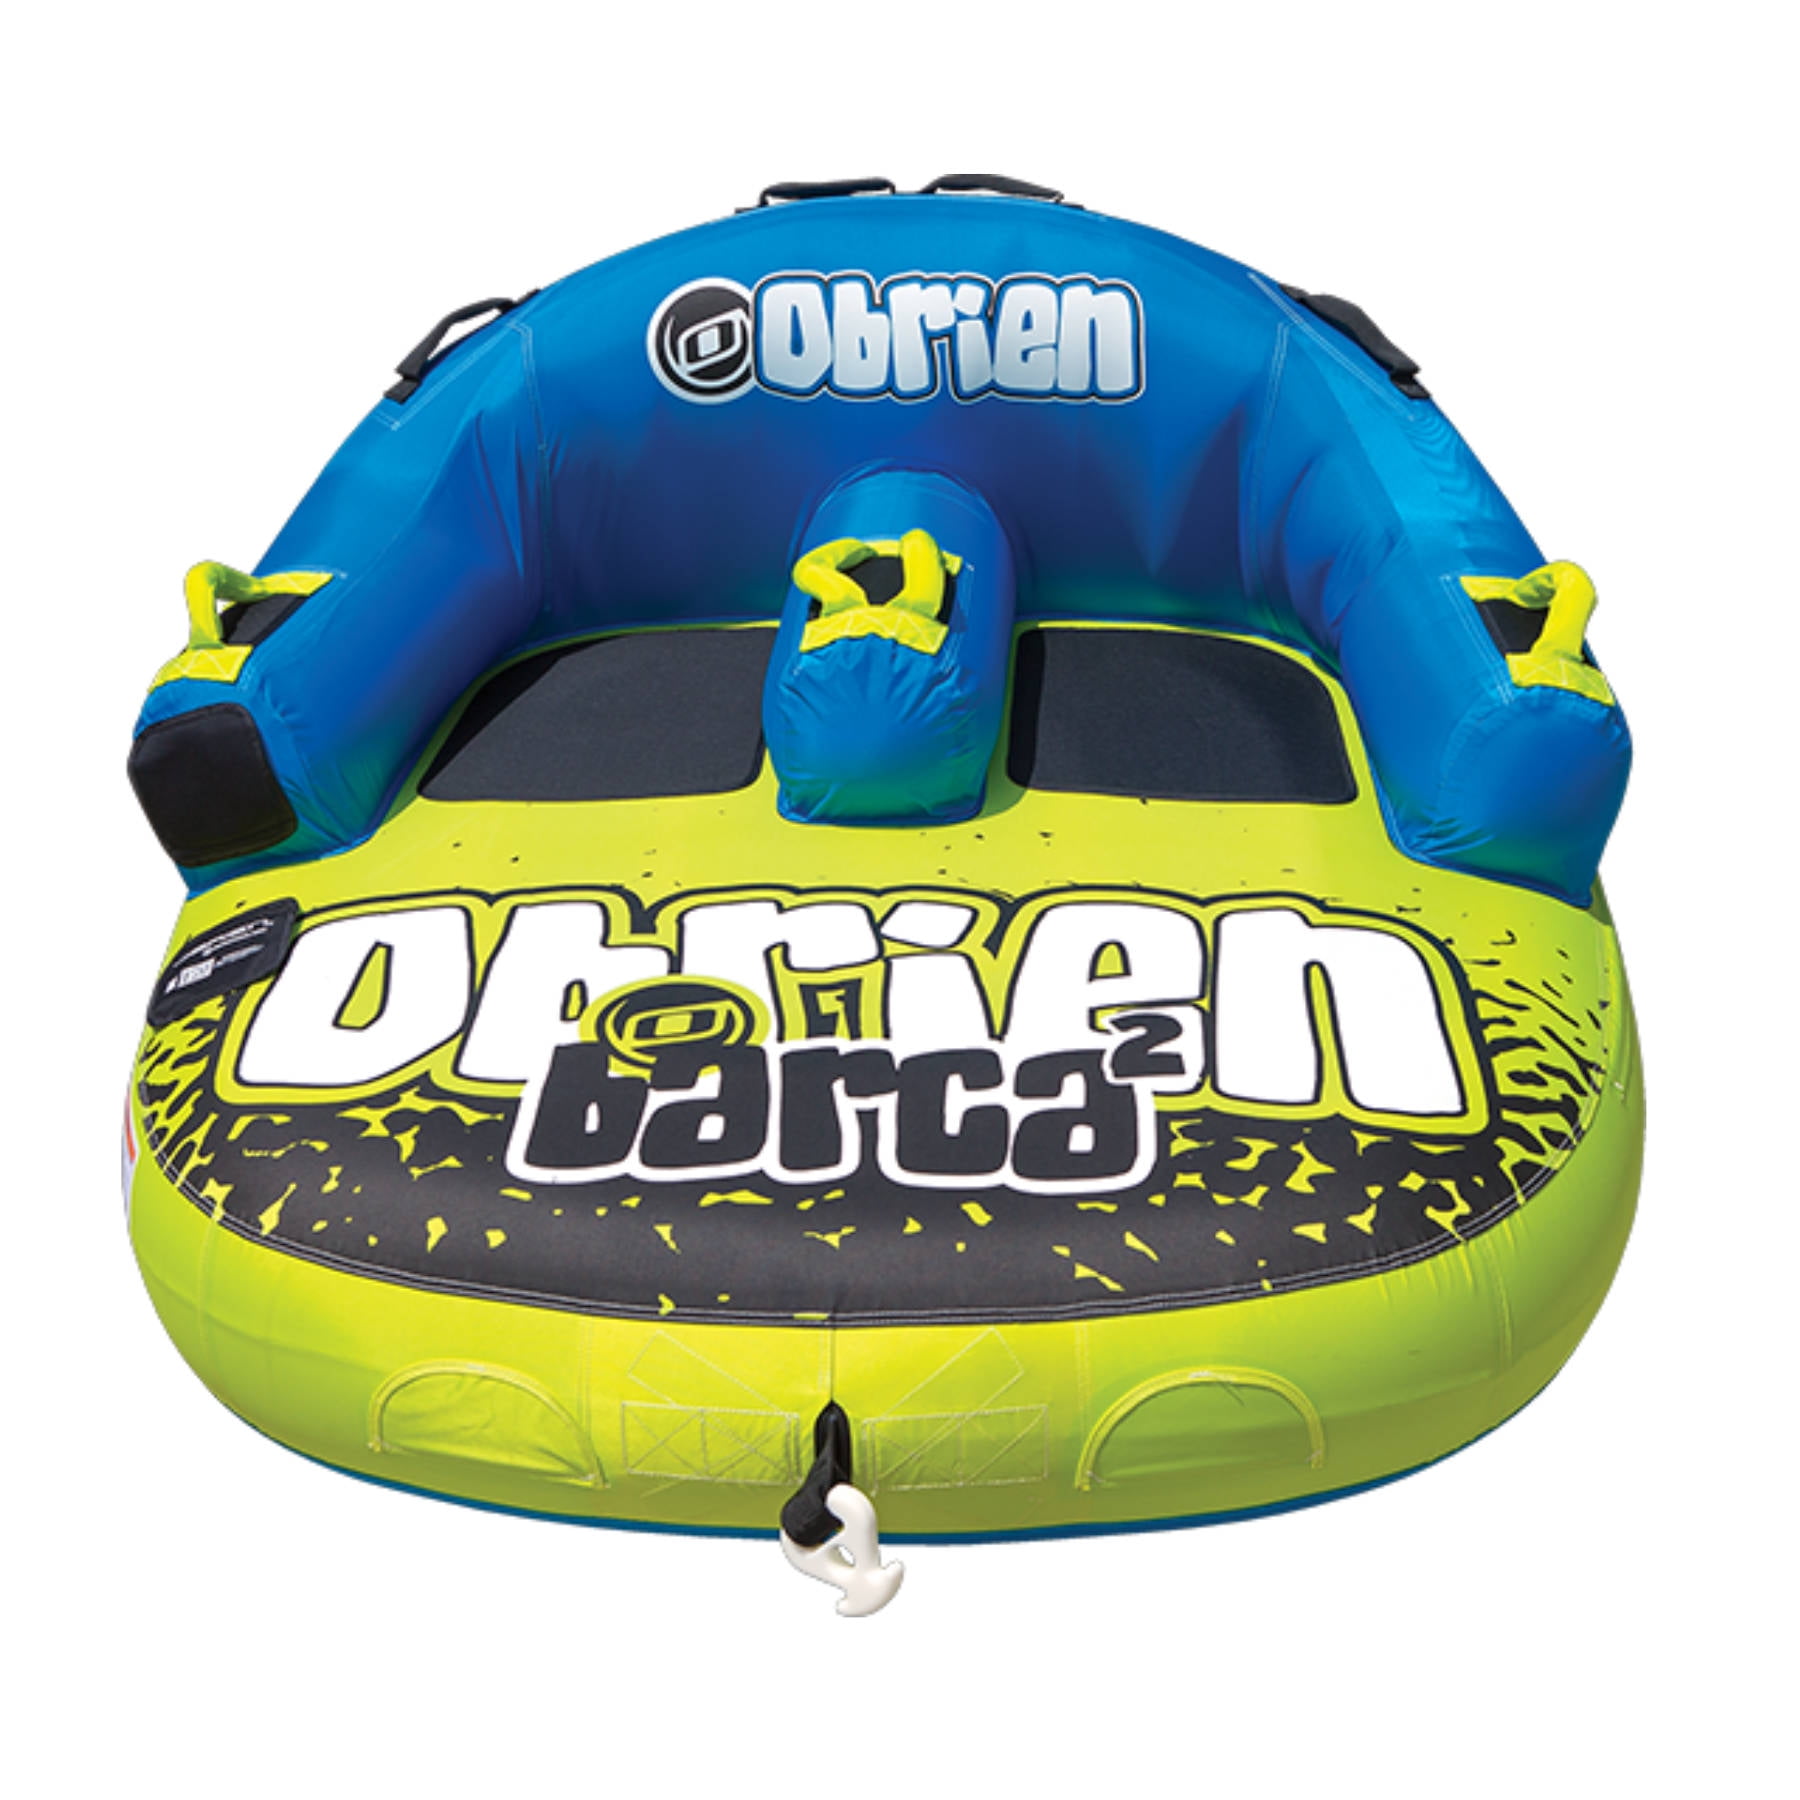 Details about   Airhead Mach 2 Inflatable 2-Rider Cockpit Towable Tube and 12V Portable Air Pump 